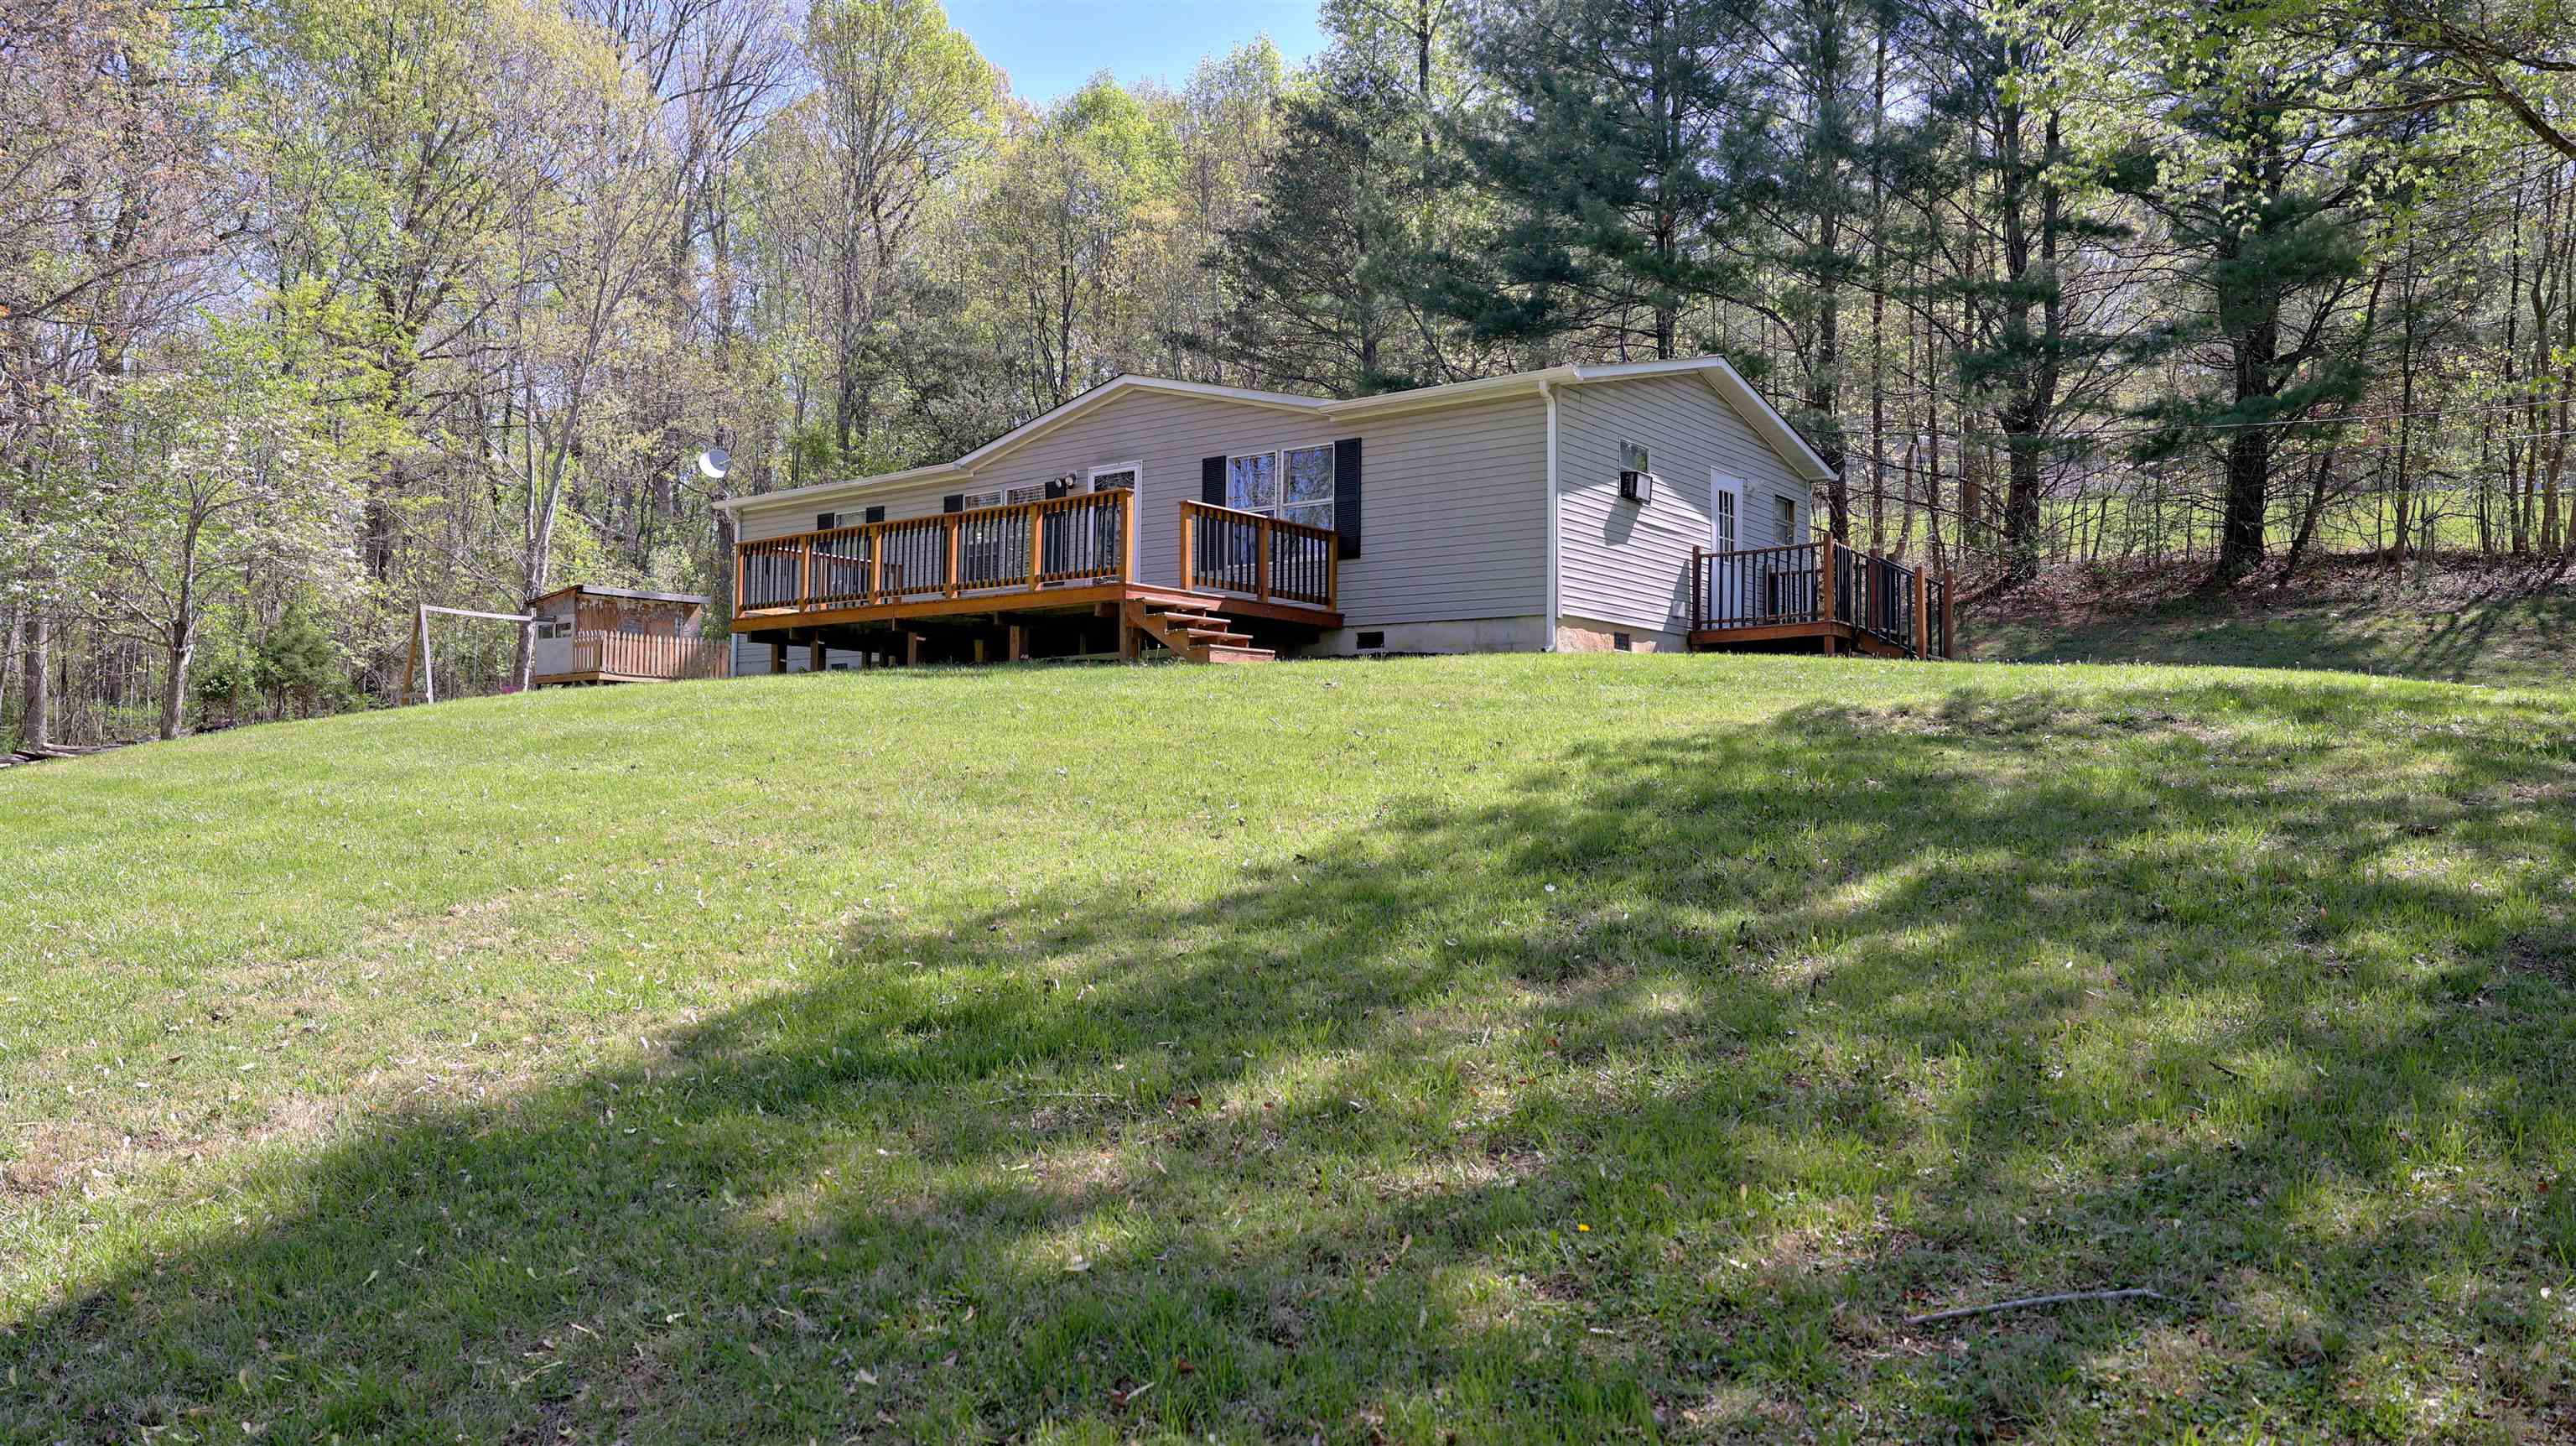 This updated three bedroom, two bath home sits on a private 1.422 acre lot surrounded by trees.  The new 16'x24' deck (2023) added on the front, updated primary bathroom (2023), updated hall bathroom (2020) and flooring, new range (2022) and dishwasher (2022) and a new roof added in 2013. Home is located on the outskirts of Christiansburg just minutes from Downtown Christiansburg, Blacksburg, VT, the Aquatic Center, shopping, restaurants & I-81. There is a large 12x20 storage building with roll up door too conveys. Great home for a first time home buyer or investor.